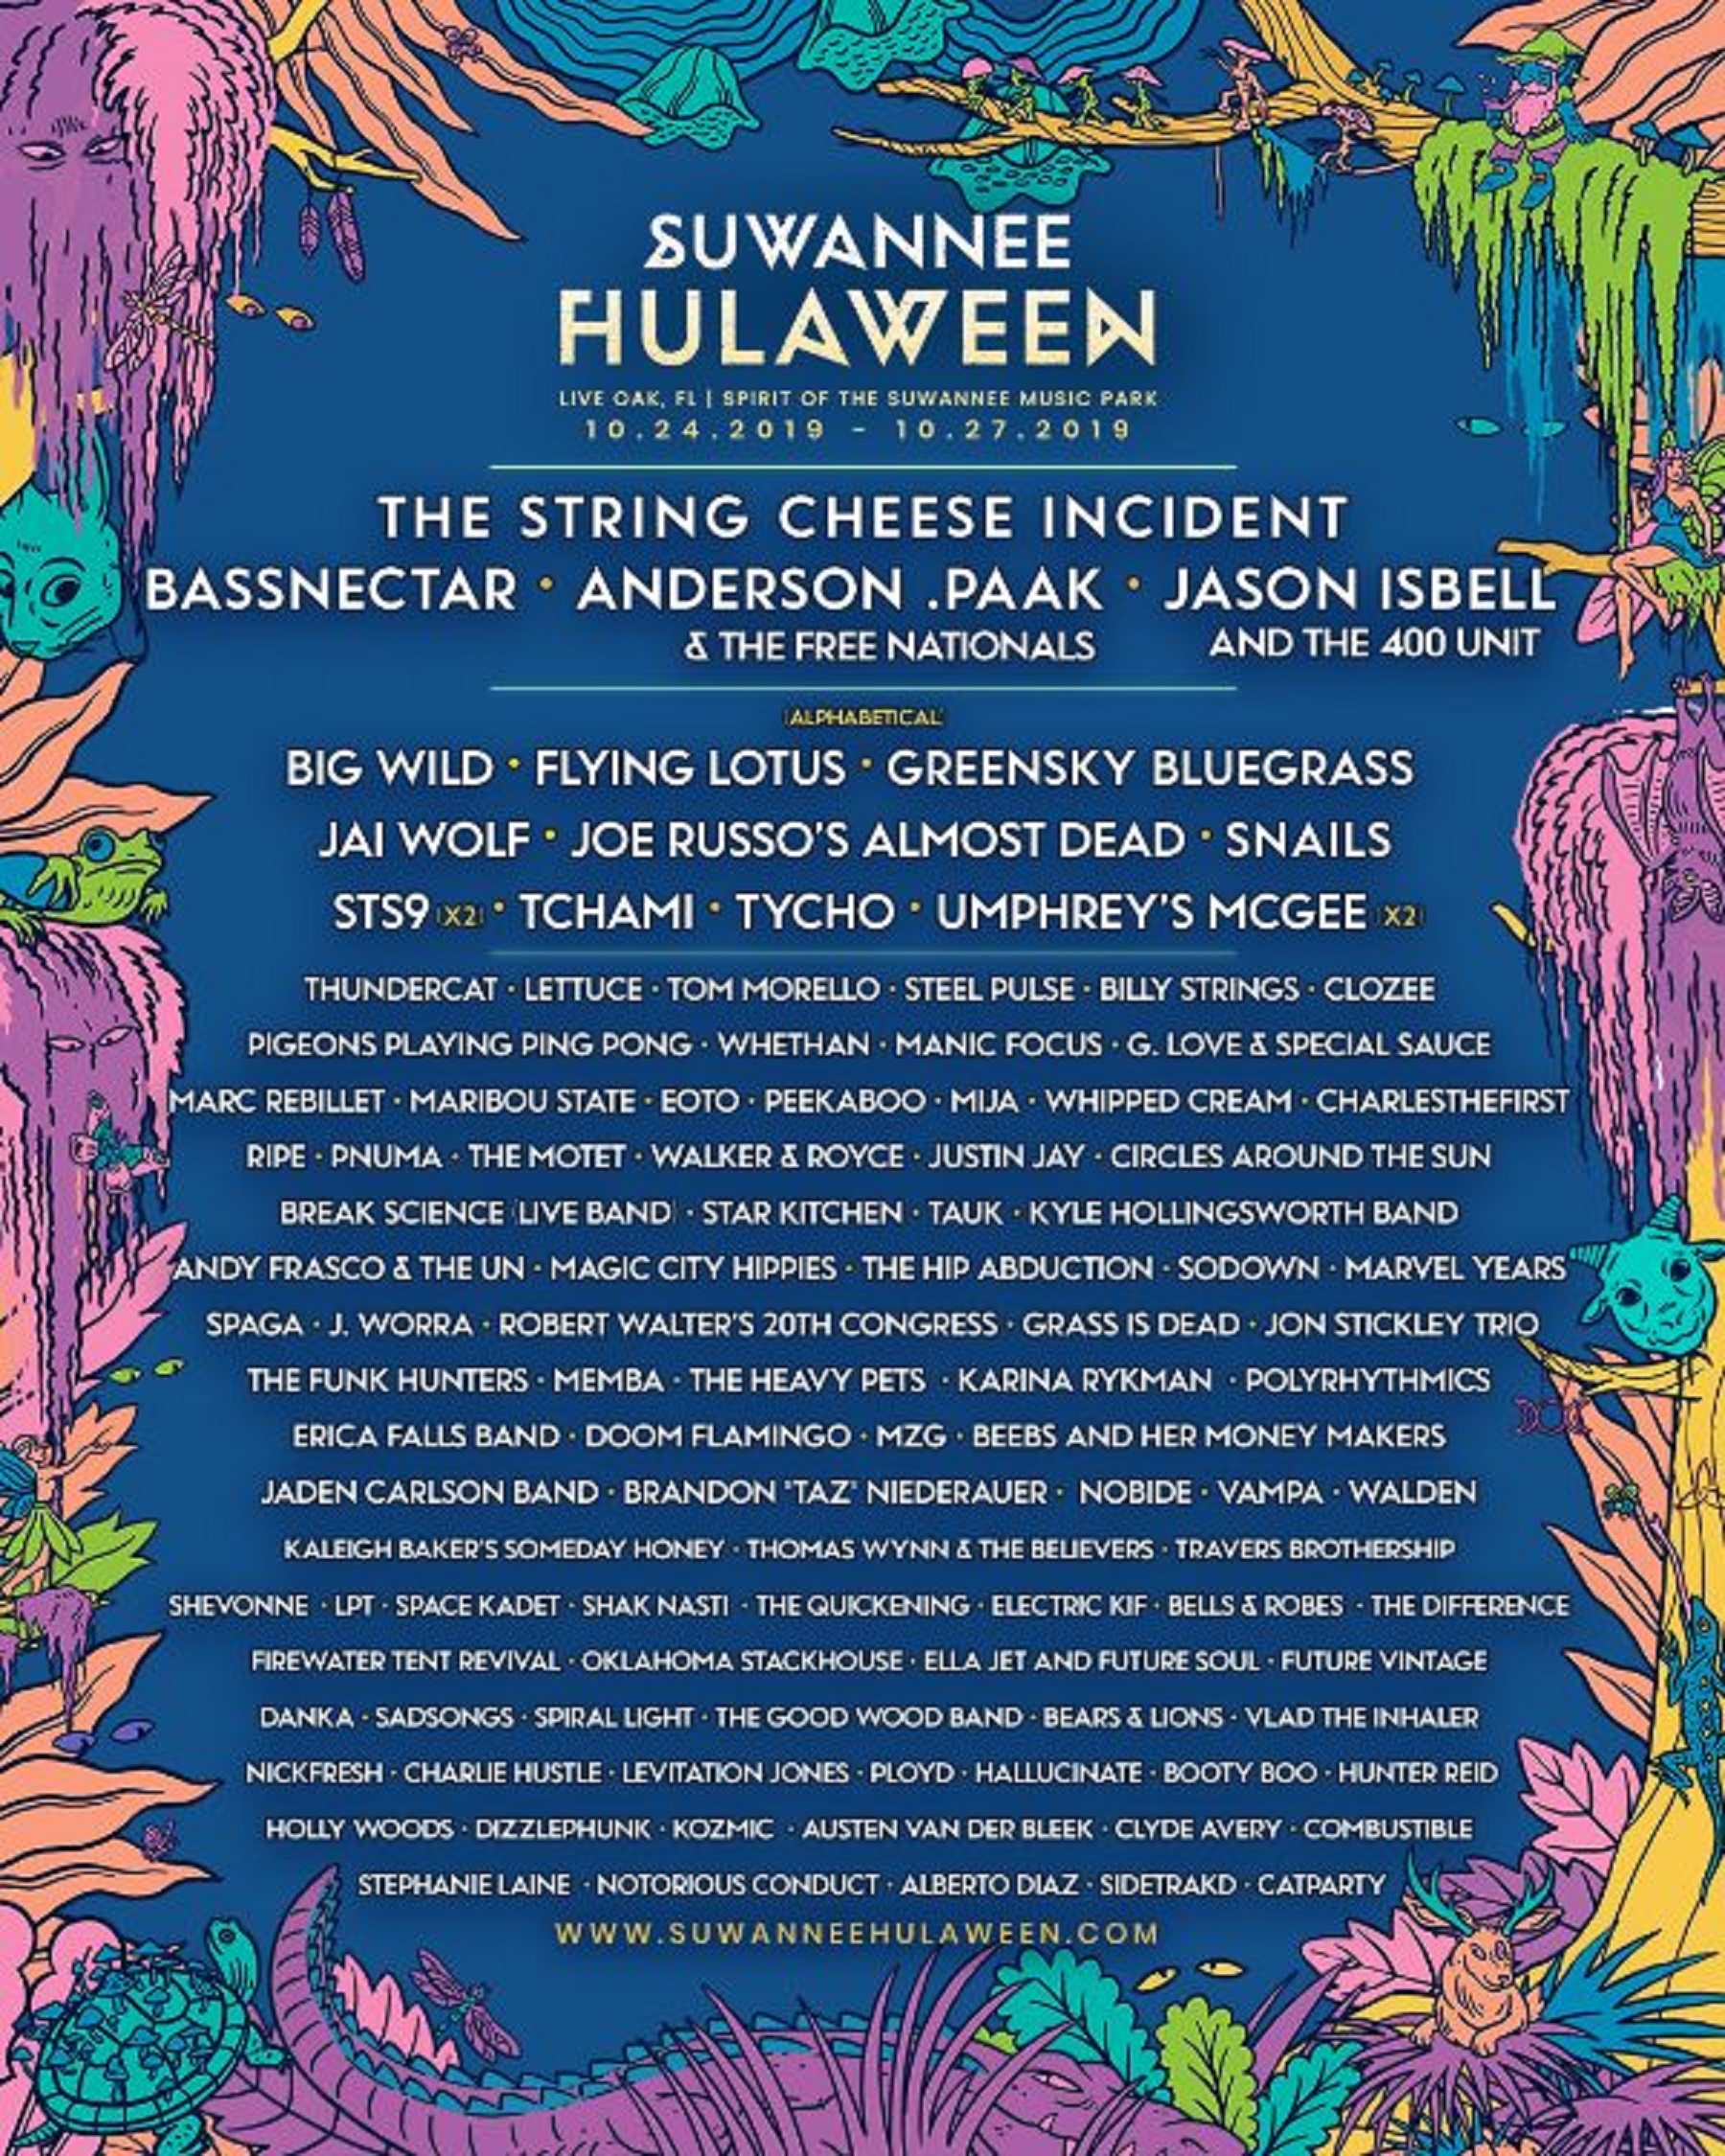 Suwannee Hulaween to bring thousands to Spirit of the Suwannee Music Park Oct. 24-27